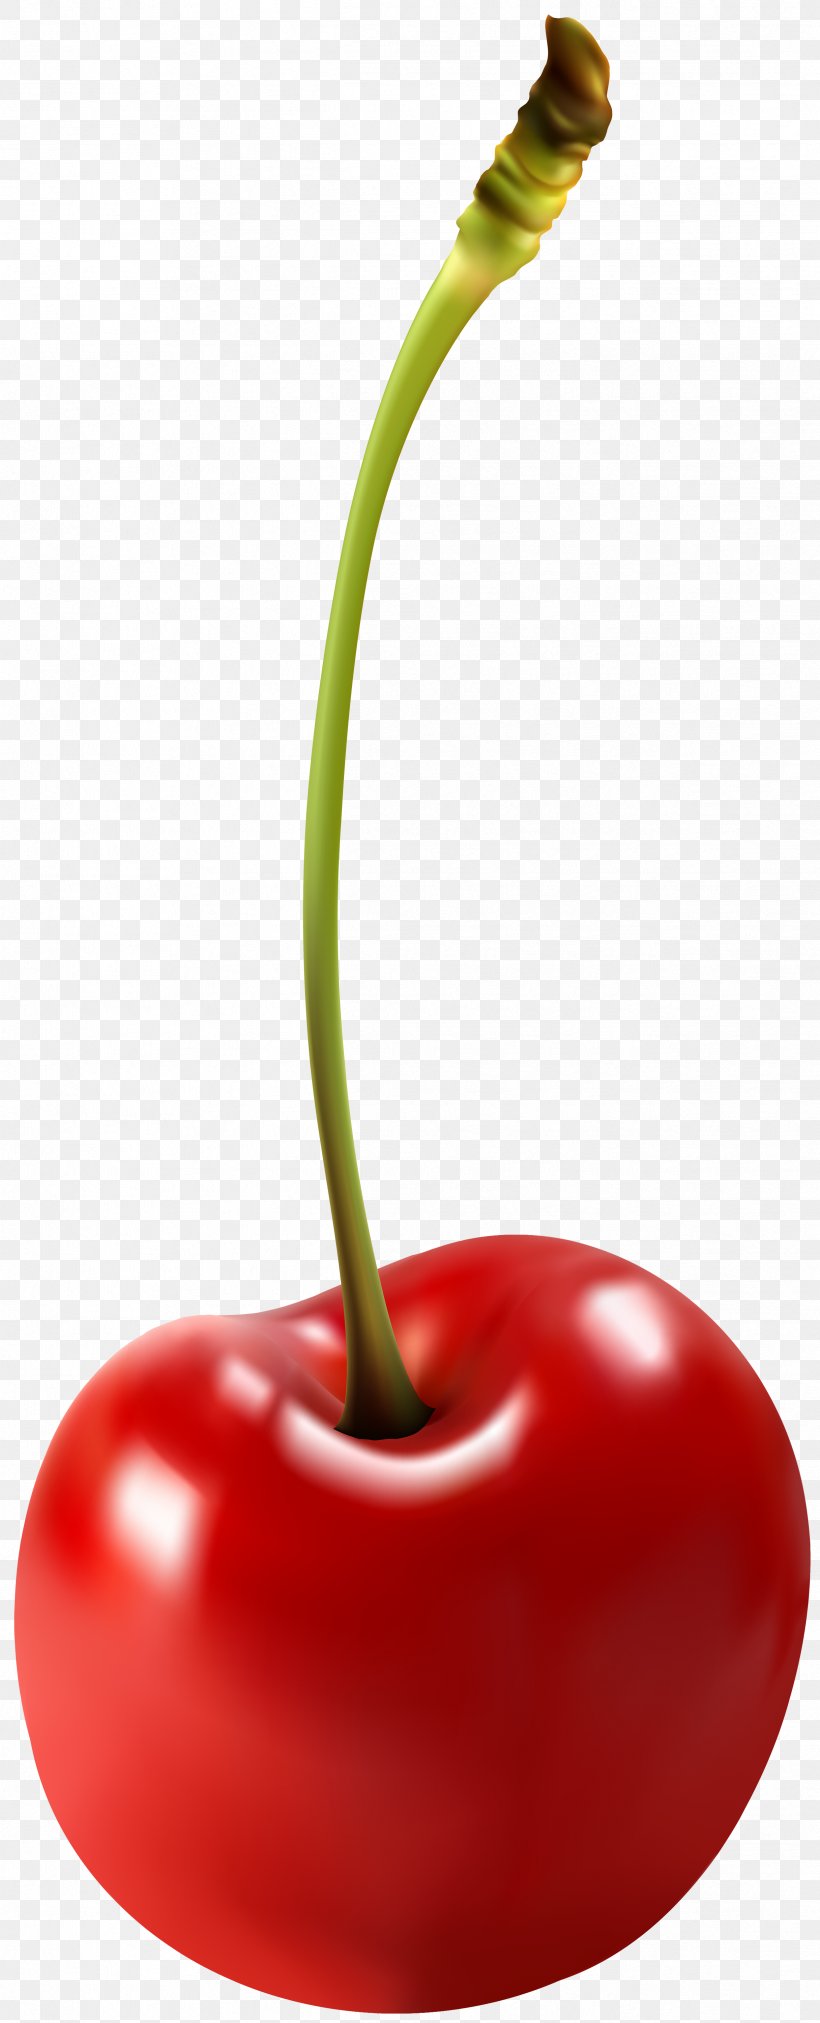 Cordial Cherry Fruit Computer File, PNG, 2432x6000px, Cherry, Bell Peppers And Chili Peppers, Buttercream, Food, Fruit Download Free